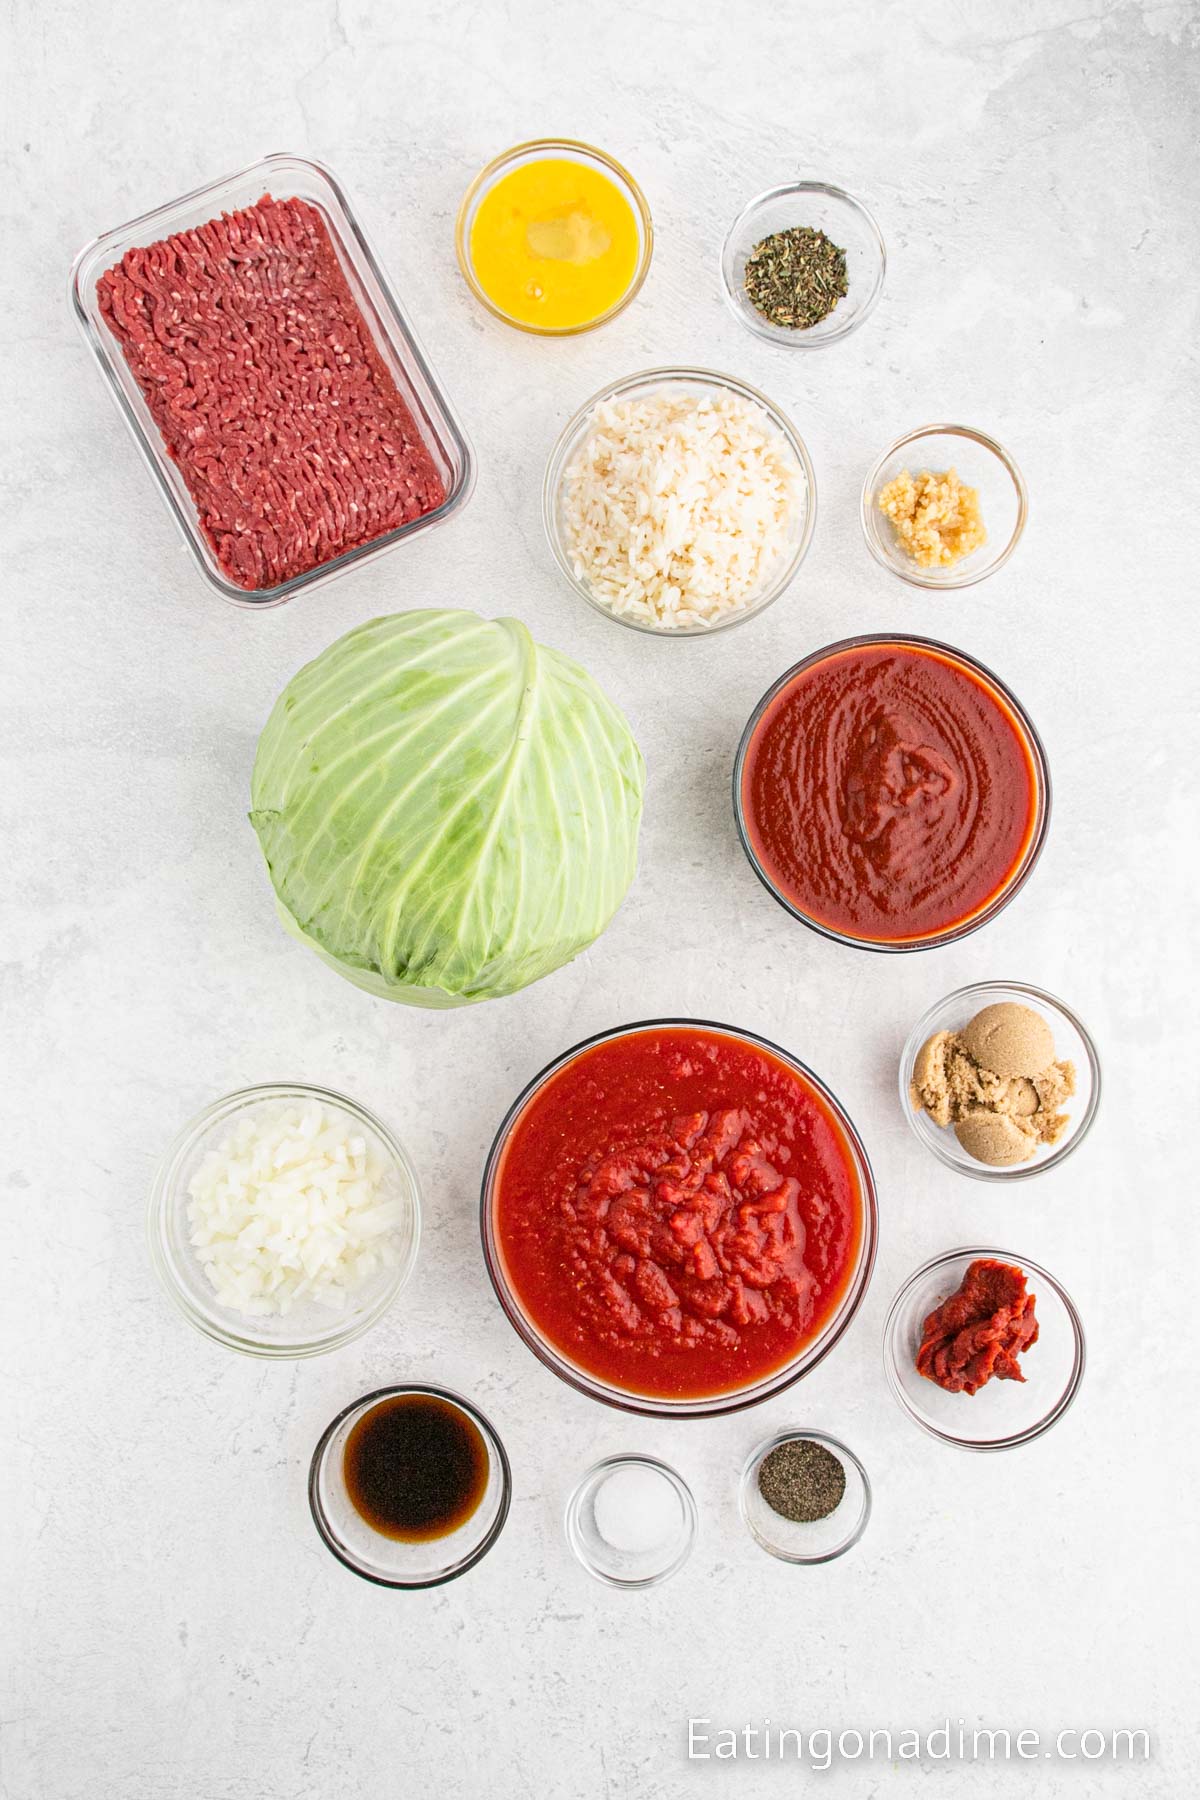 Cabbage Rolls Ingredients - cabbage, ground beef, onion, rice, minced garlic, egg, italian seasoning, salt, pepper, crushed tomatoes, tomato sauce, tomato paste, worcestershire sauce, brown sugar